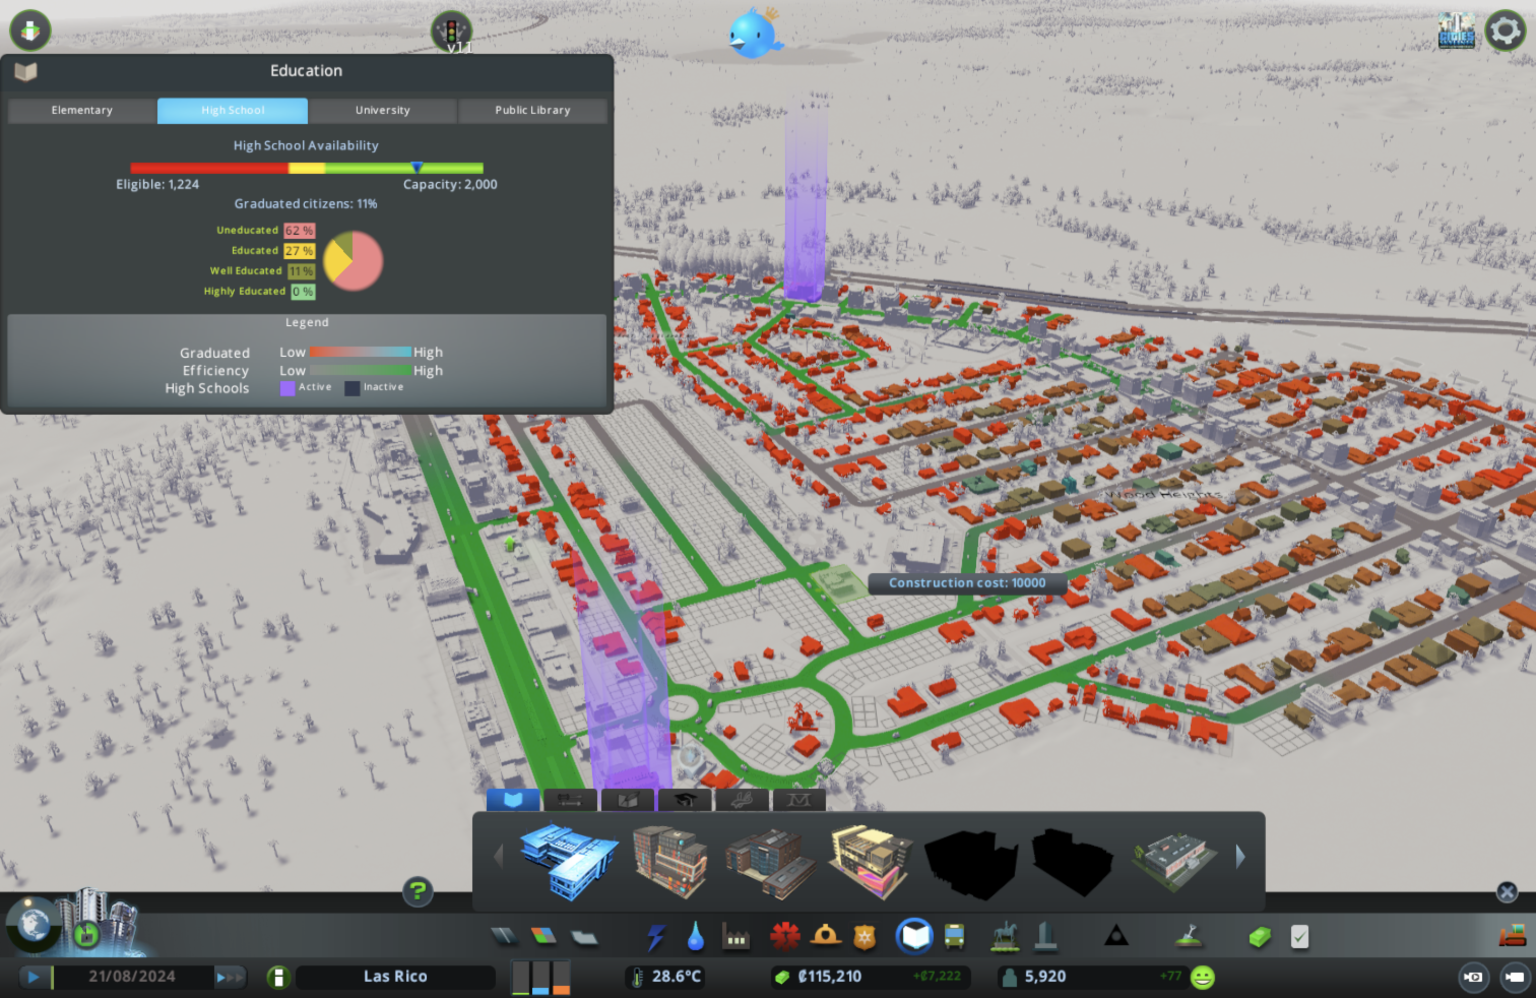 not enough workers cities skylines over educated